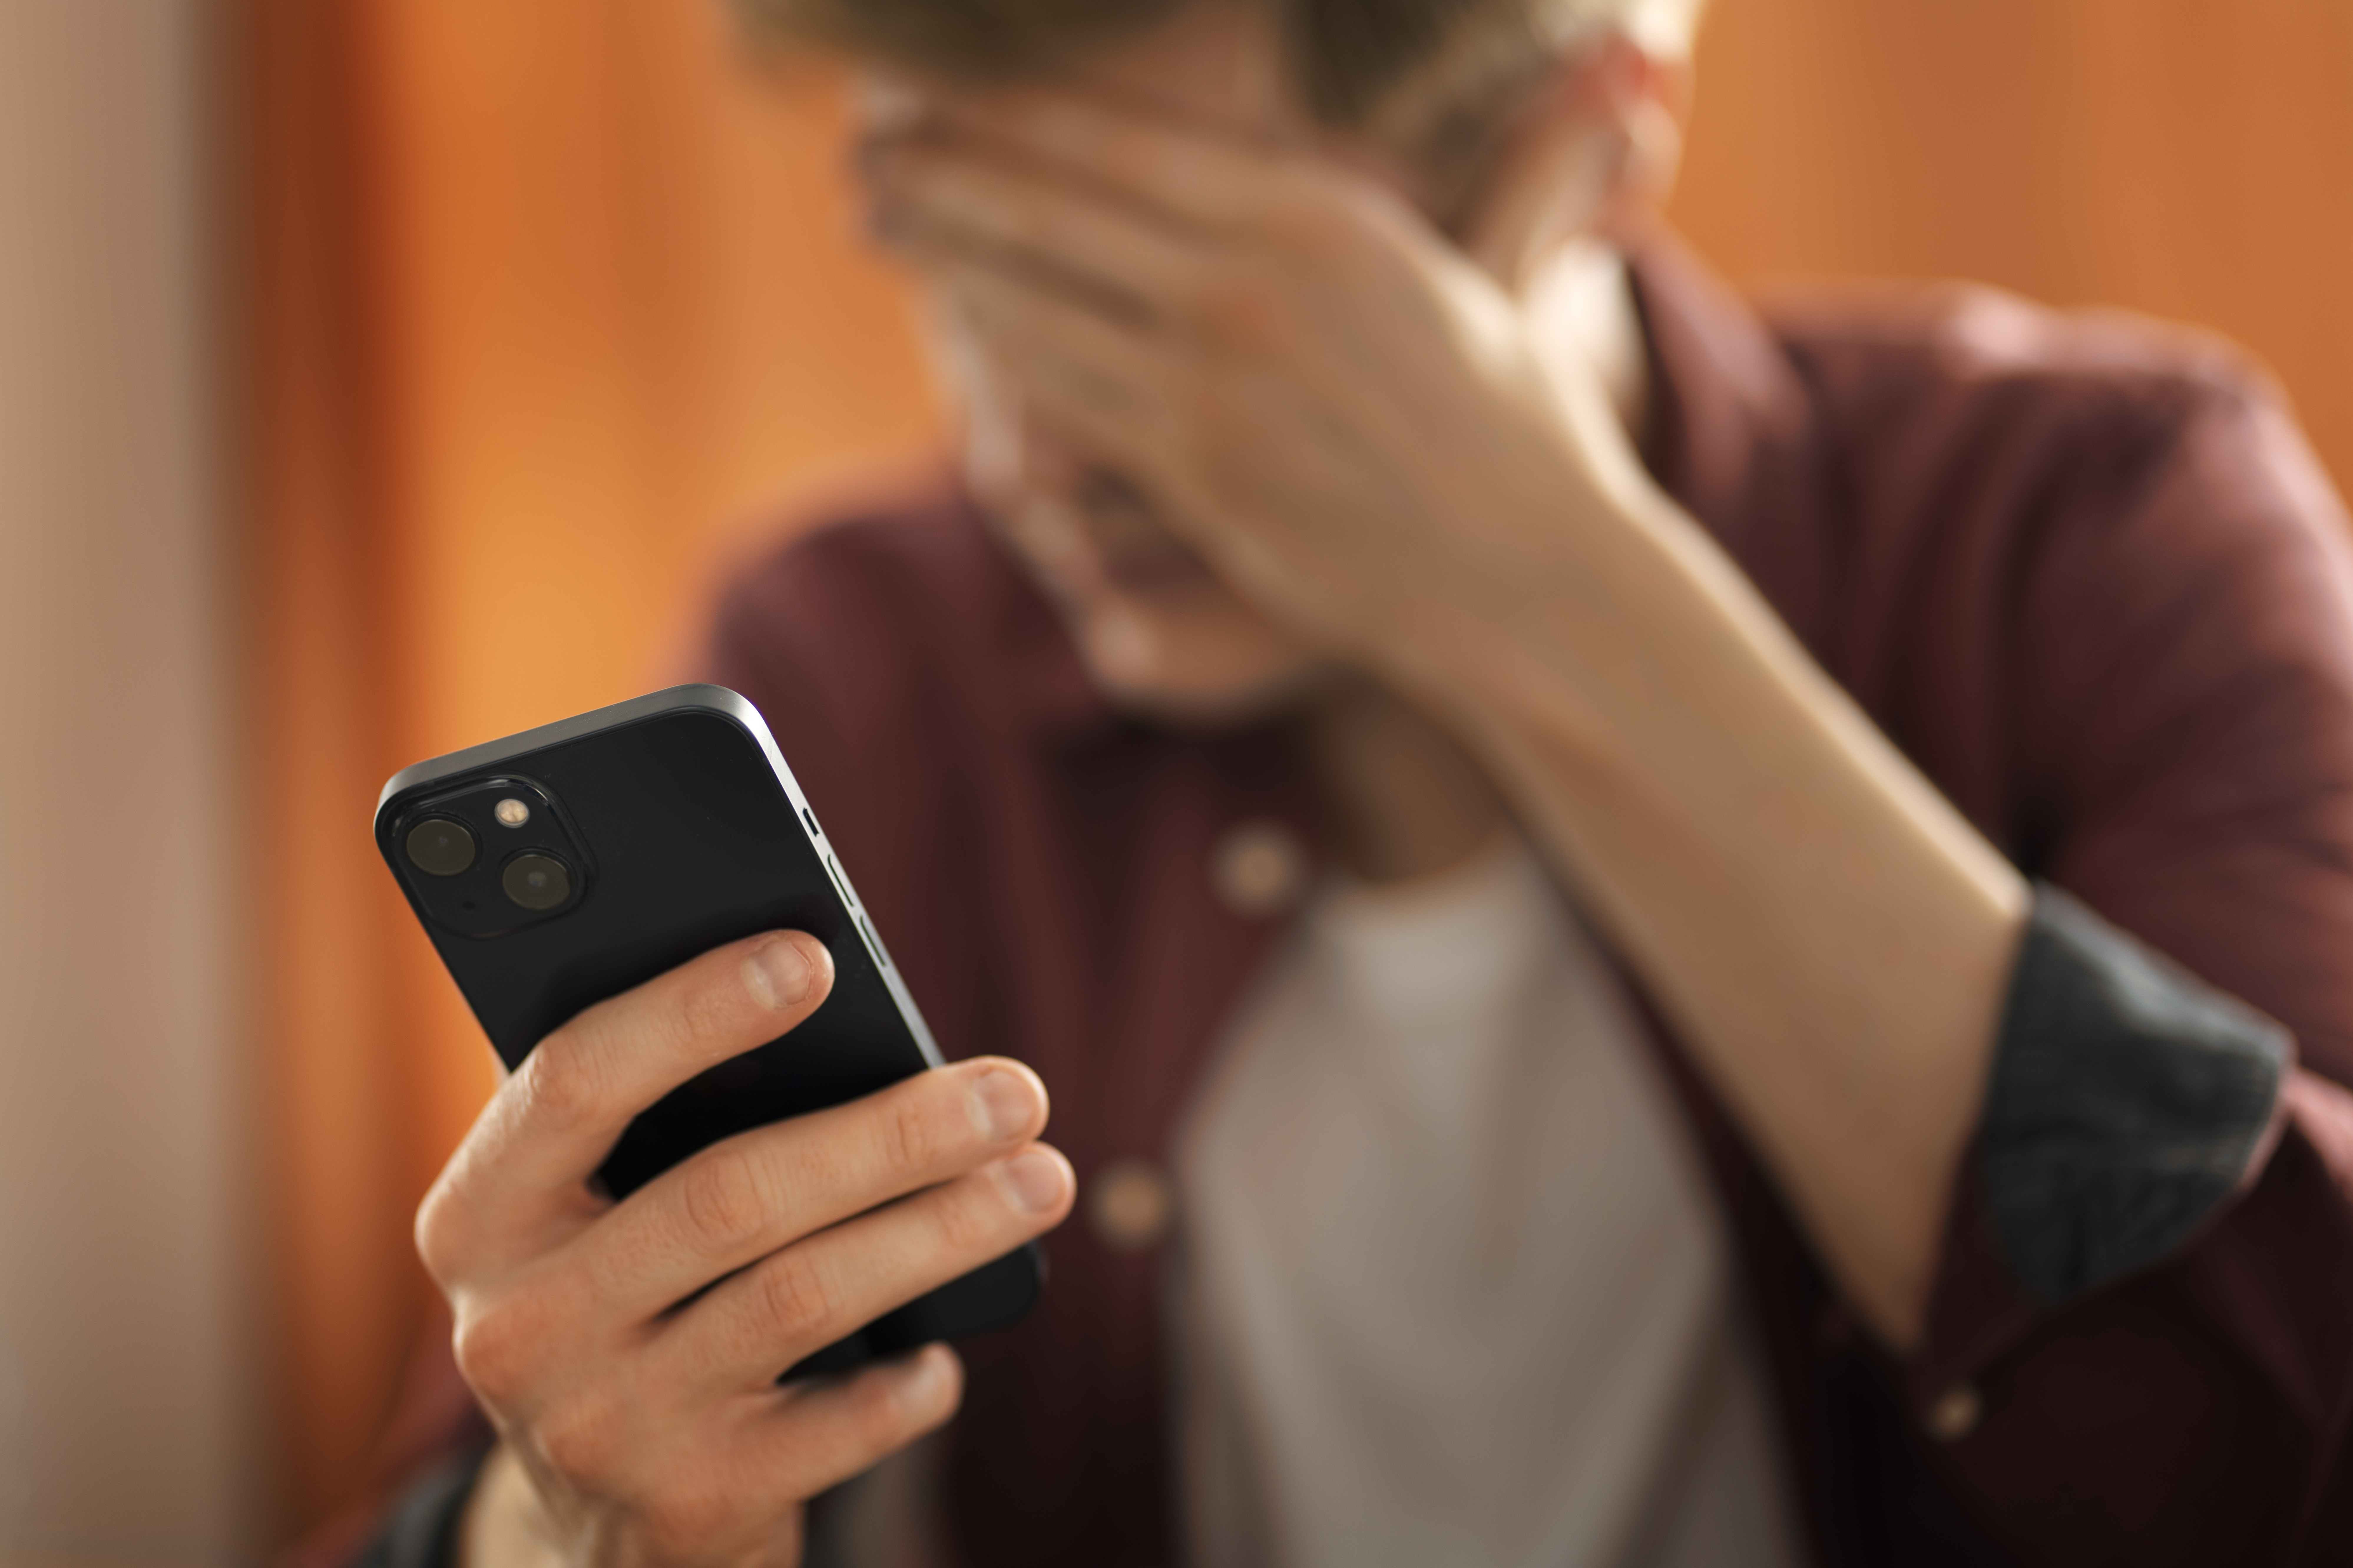 Man regrets receiving bad news on his phone